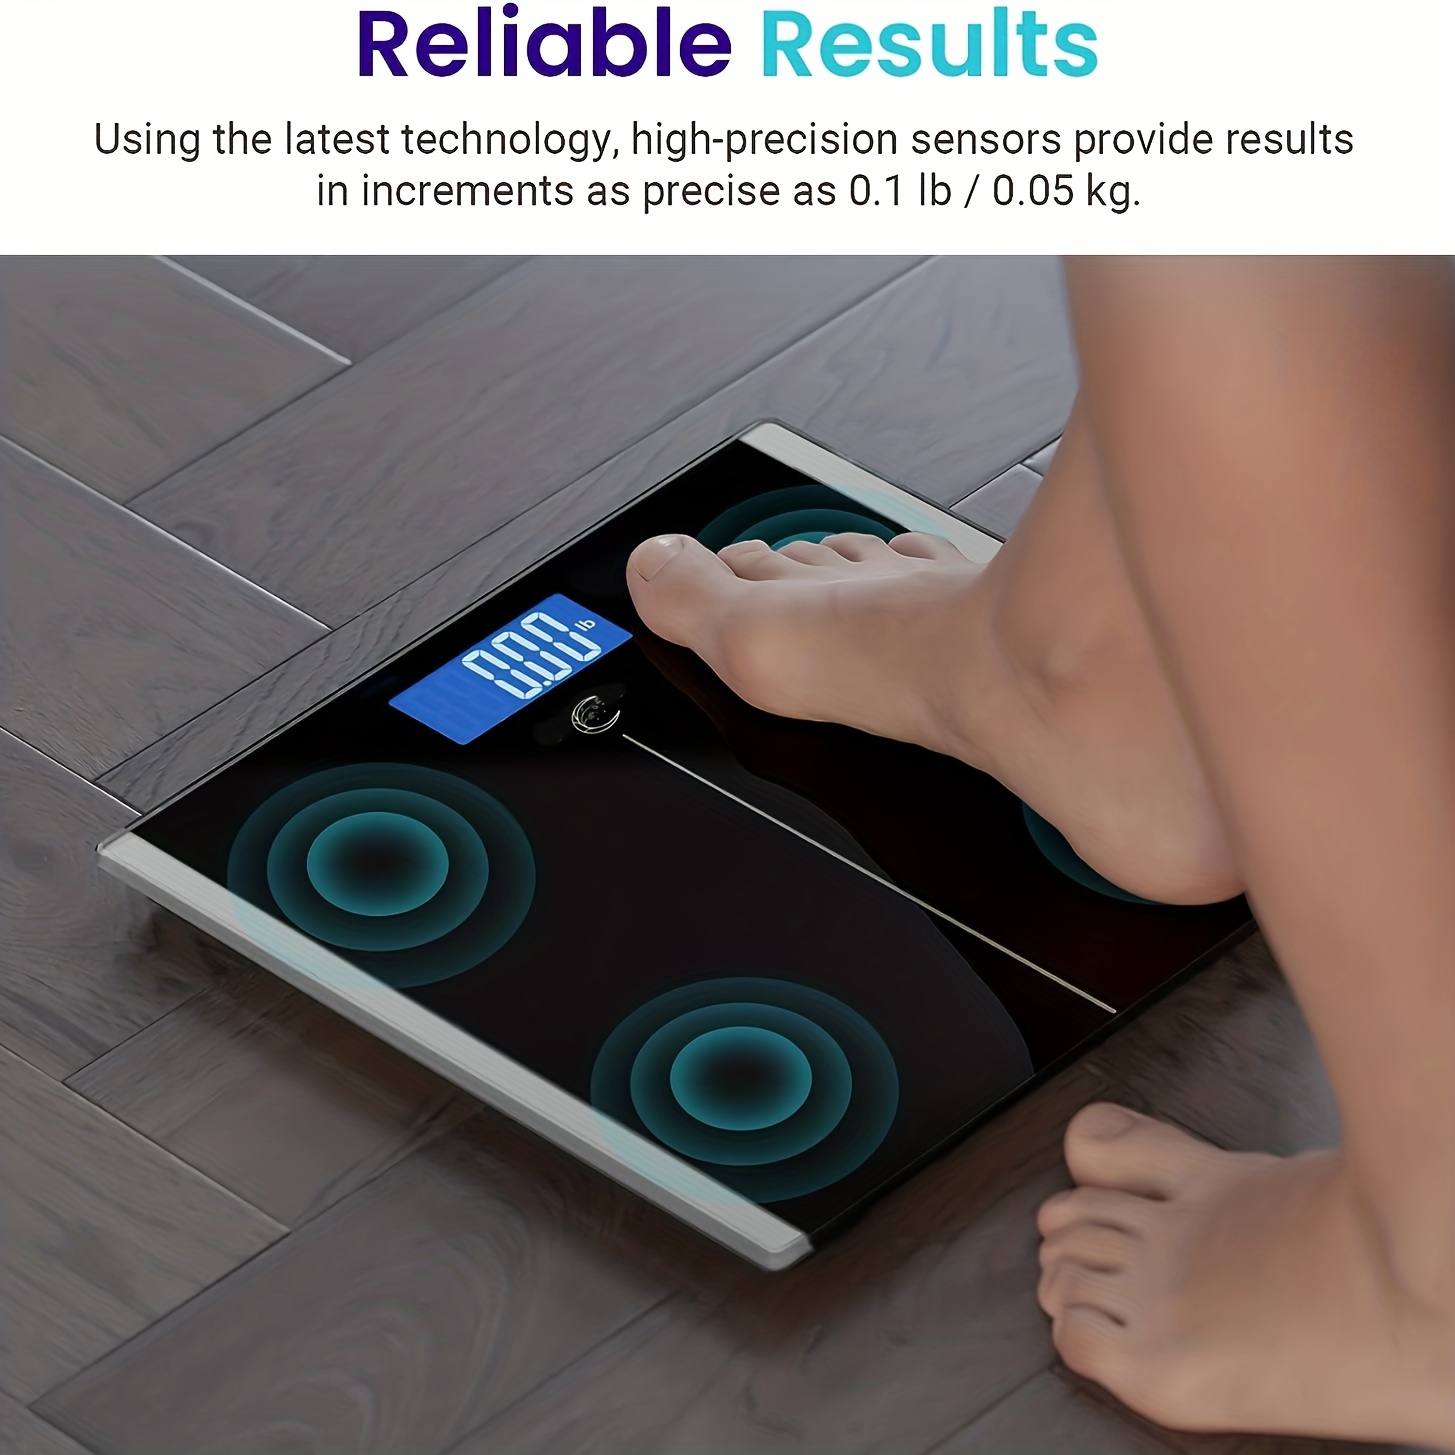 Digital Body Weight Bathroom Scale, Weighing Scale,Step-On Technology, 400  Pounds 